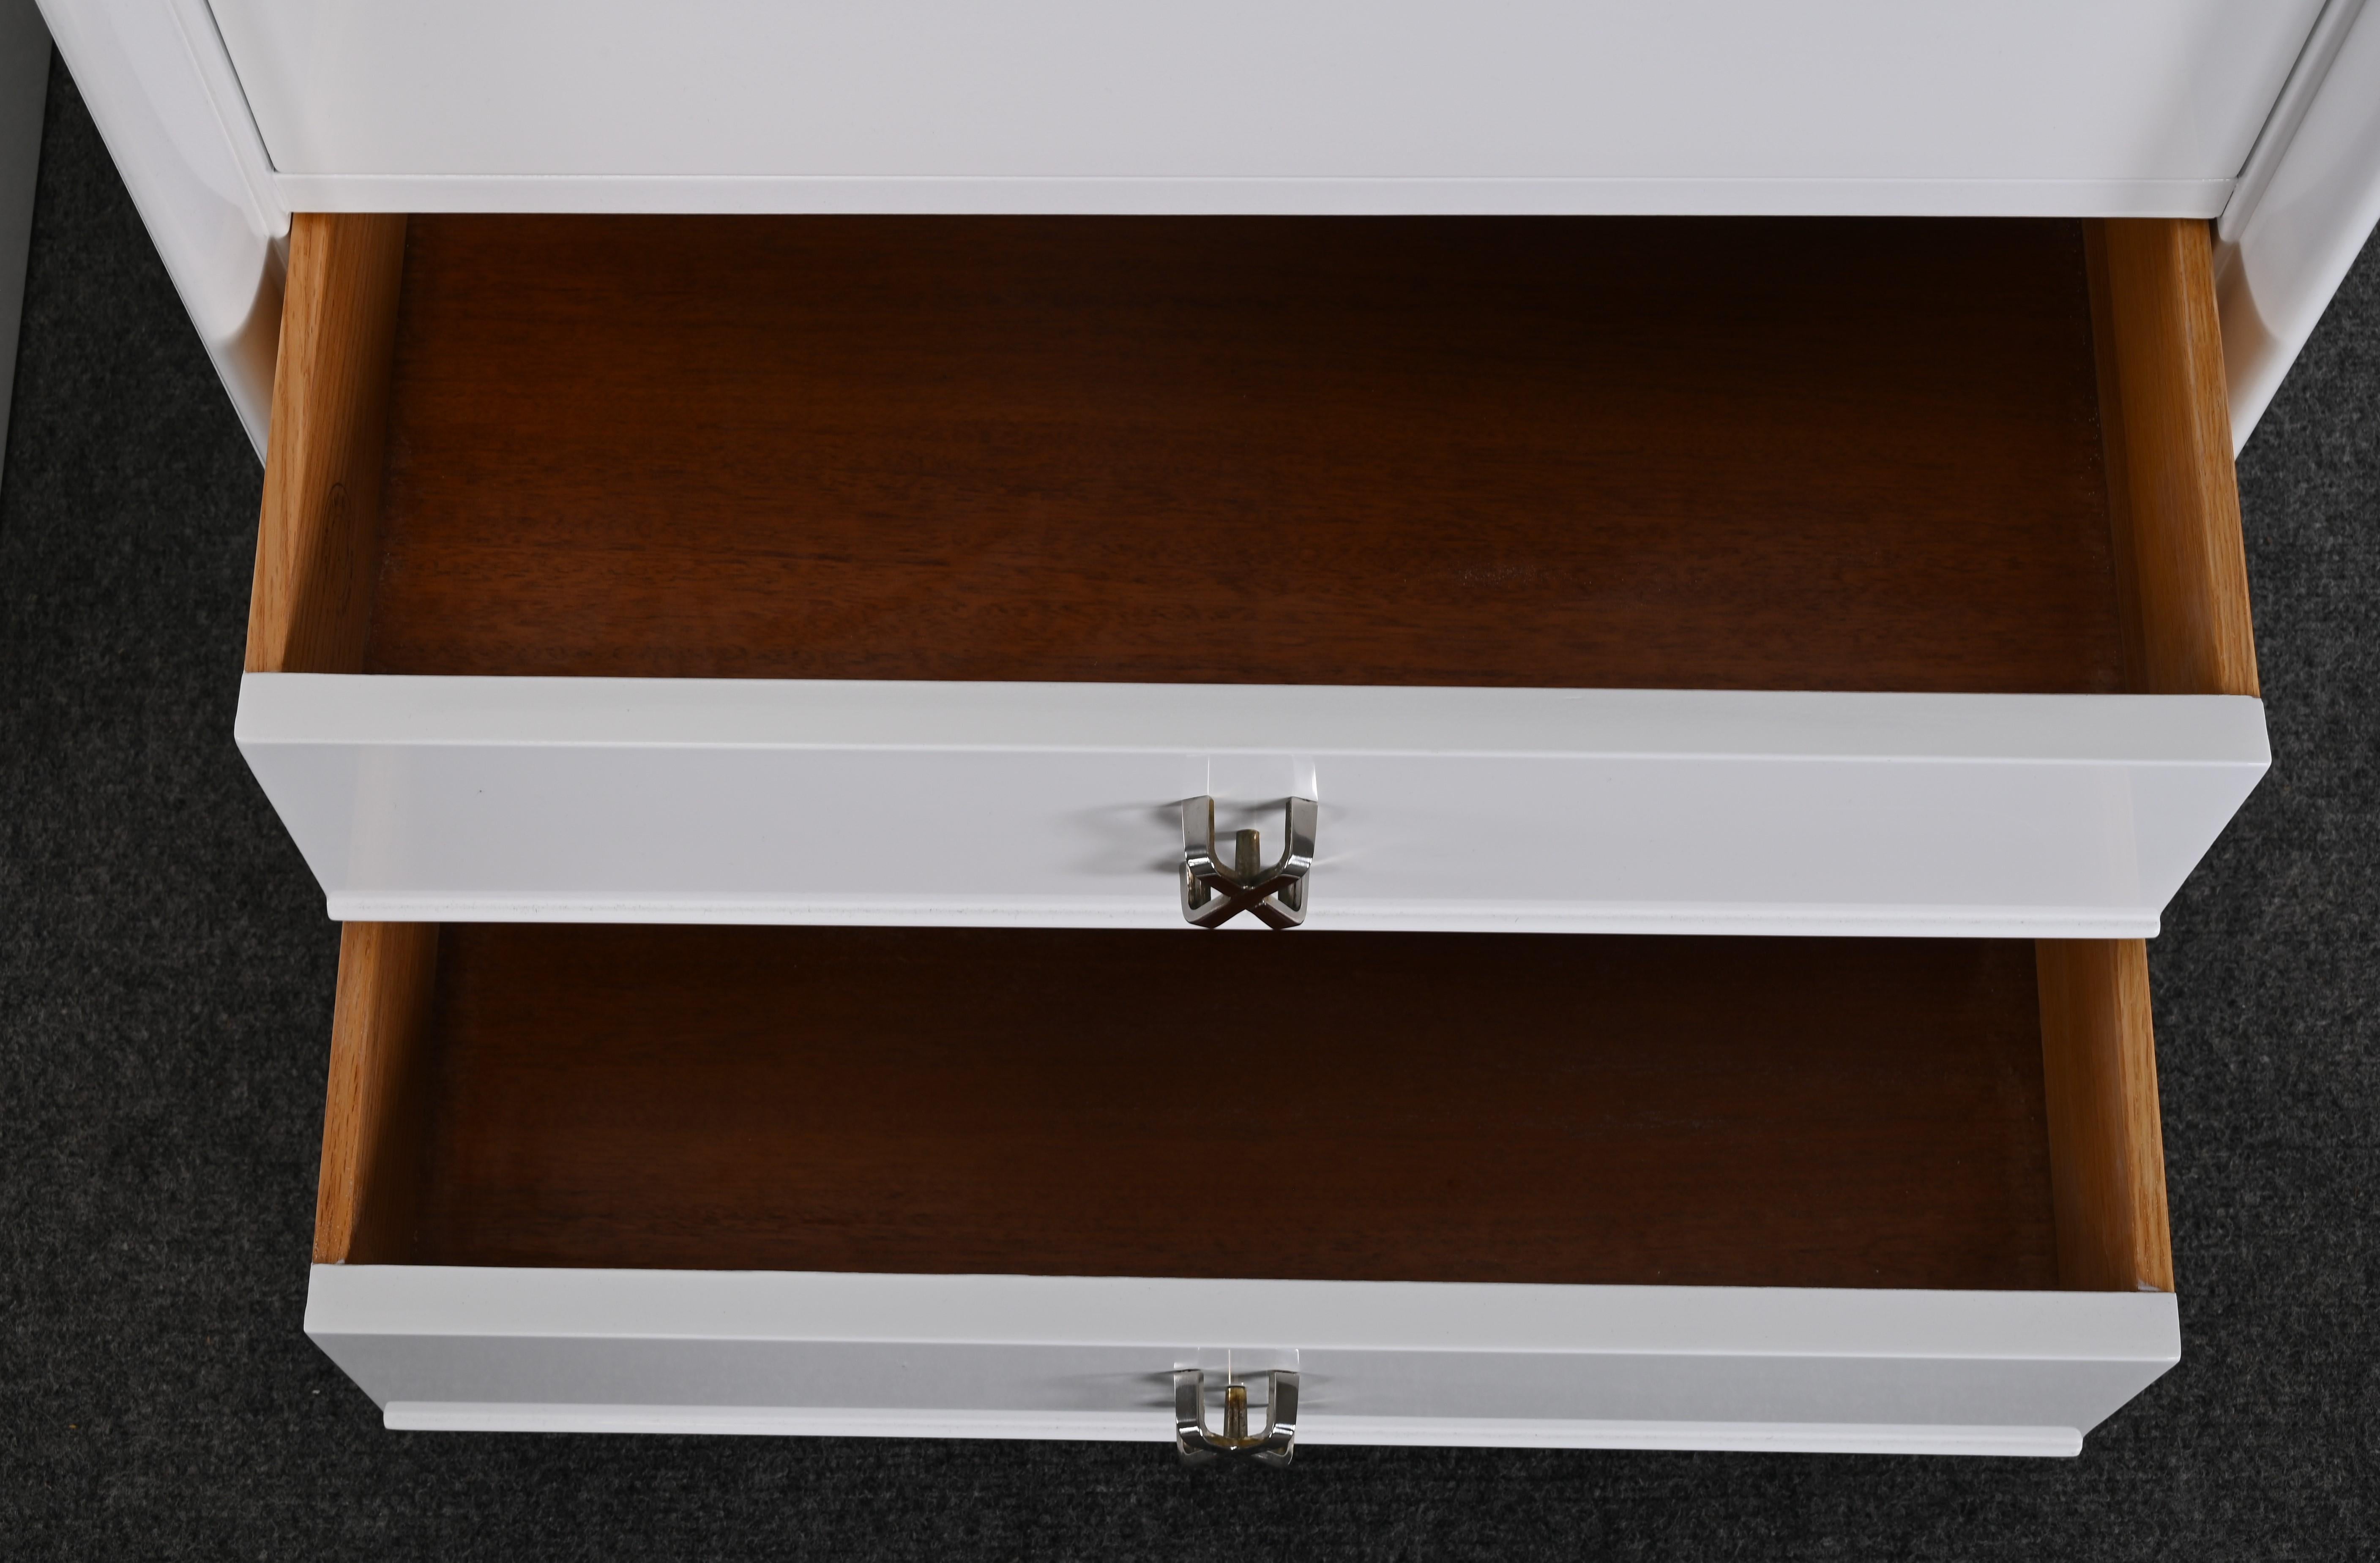 Pair of Bedside Tables with Silver X-Pulls by Paul Frankl, 1950 For Sale 8